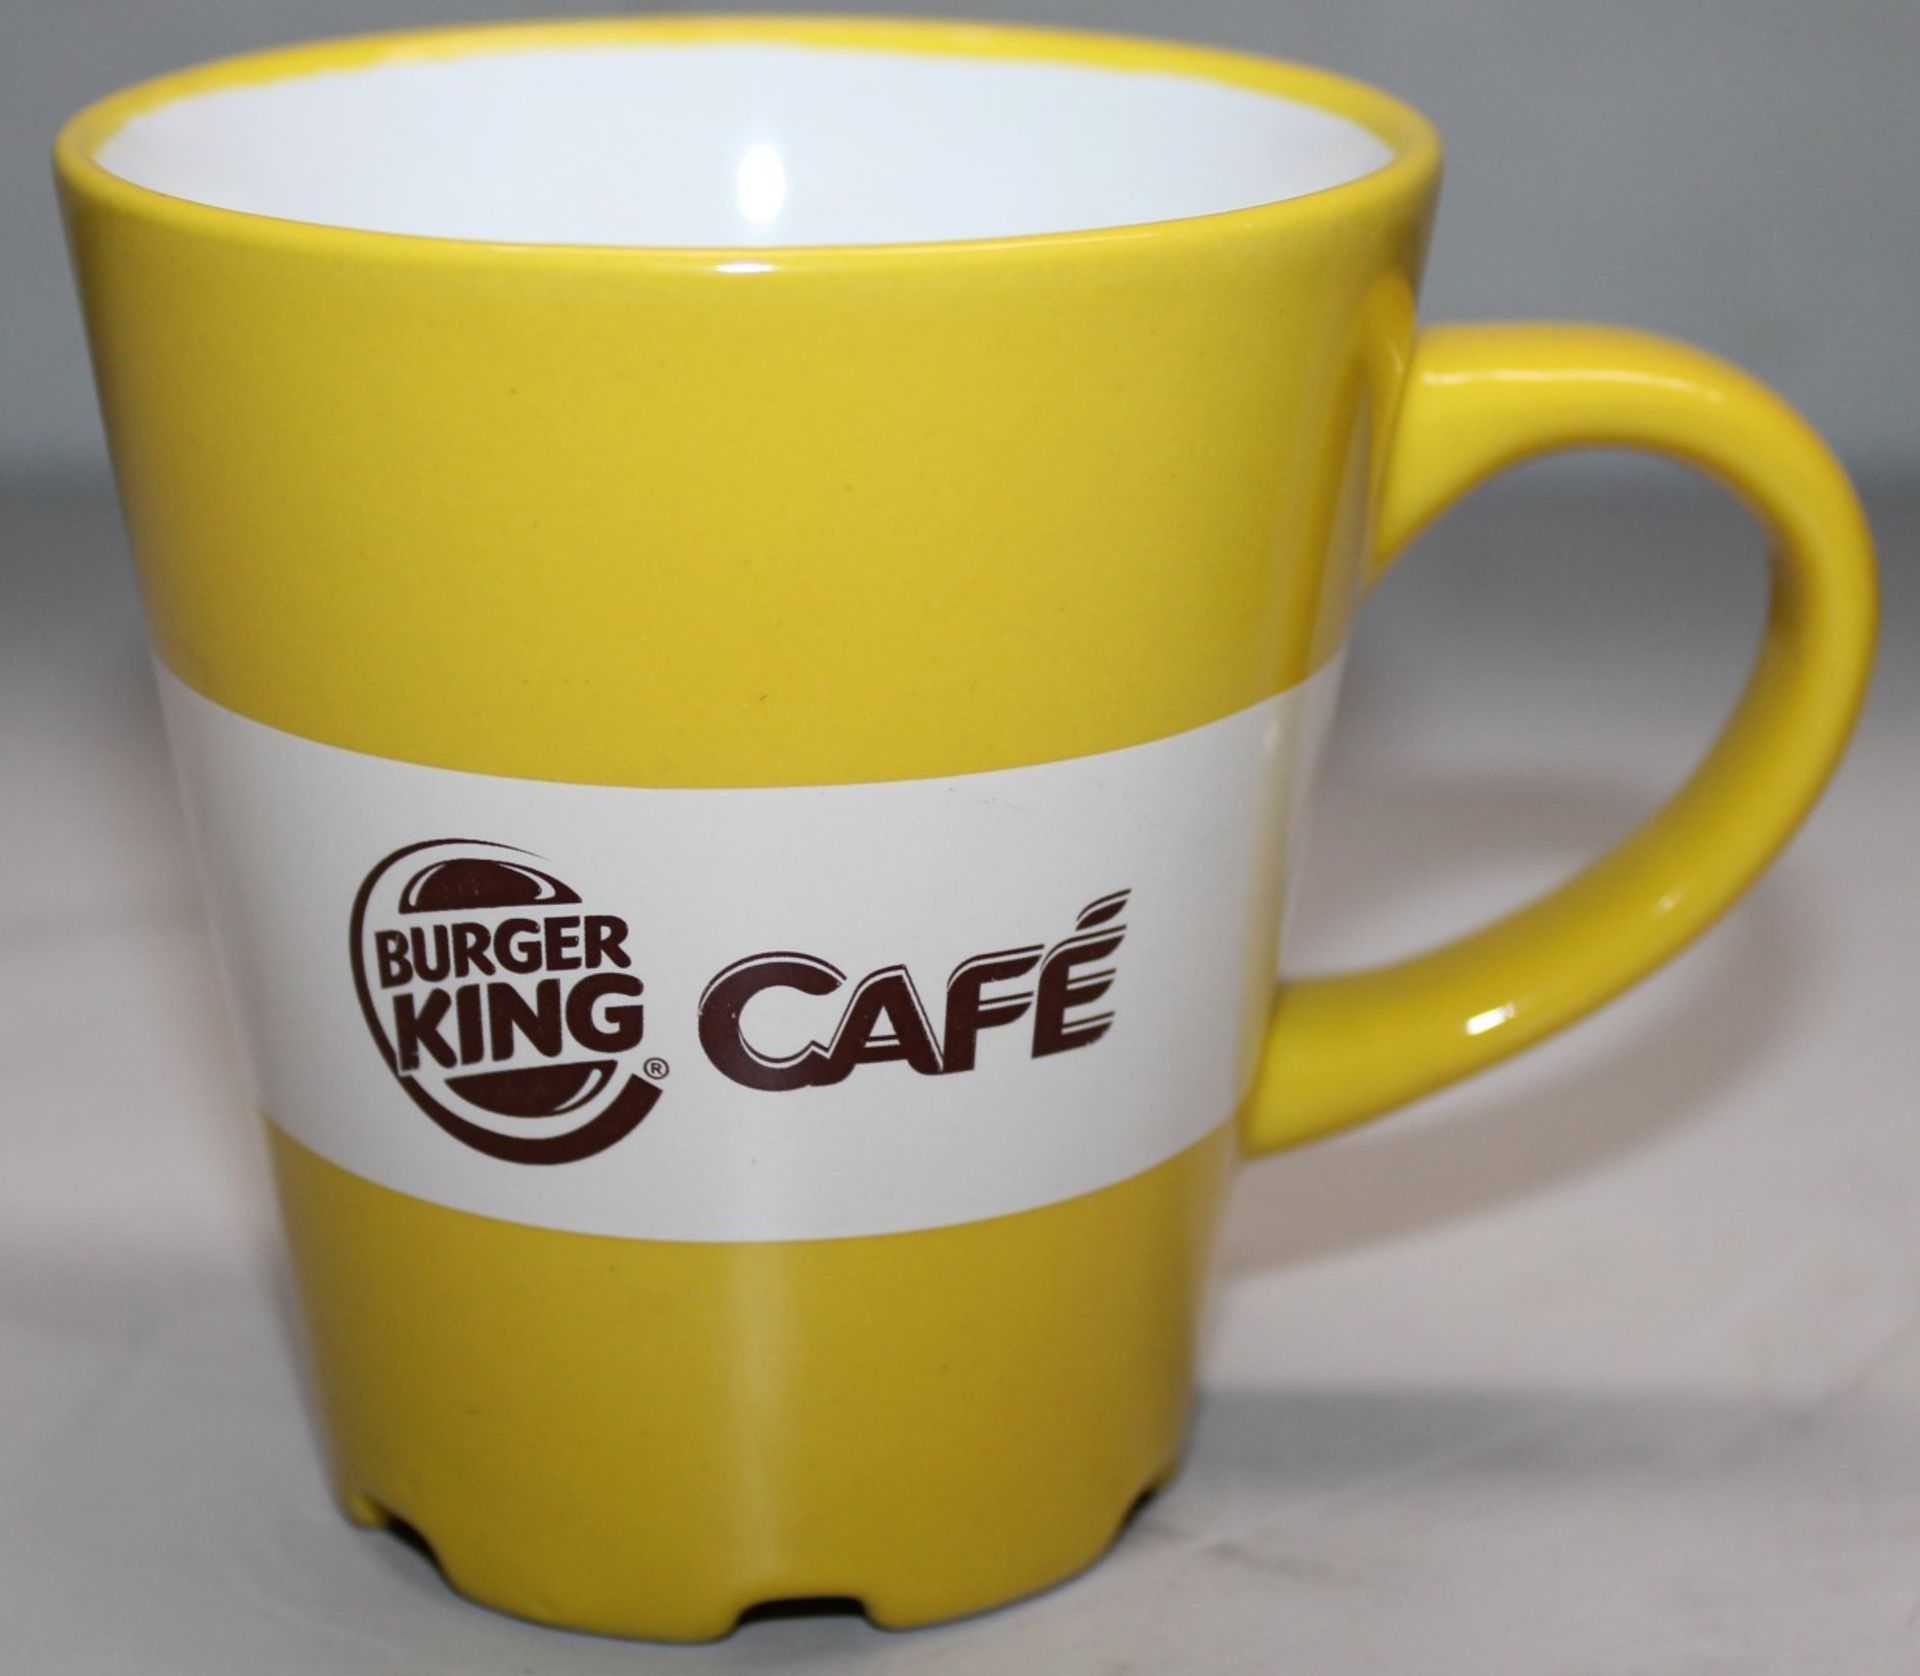 35 x Burger King Ceramic Coffee Mugs - Various Colours - Brand New Boxed Stock - CL011 - Location: - Image 5 of 5